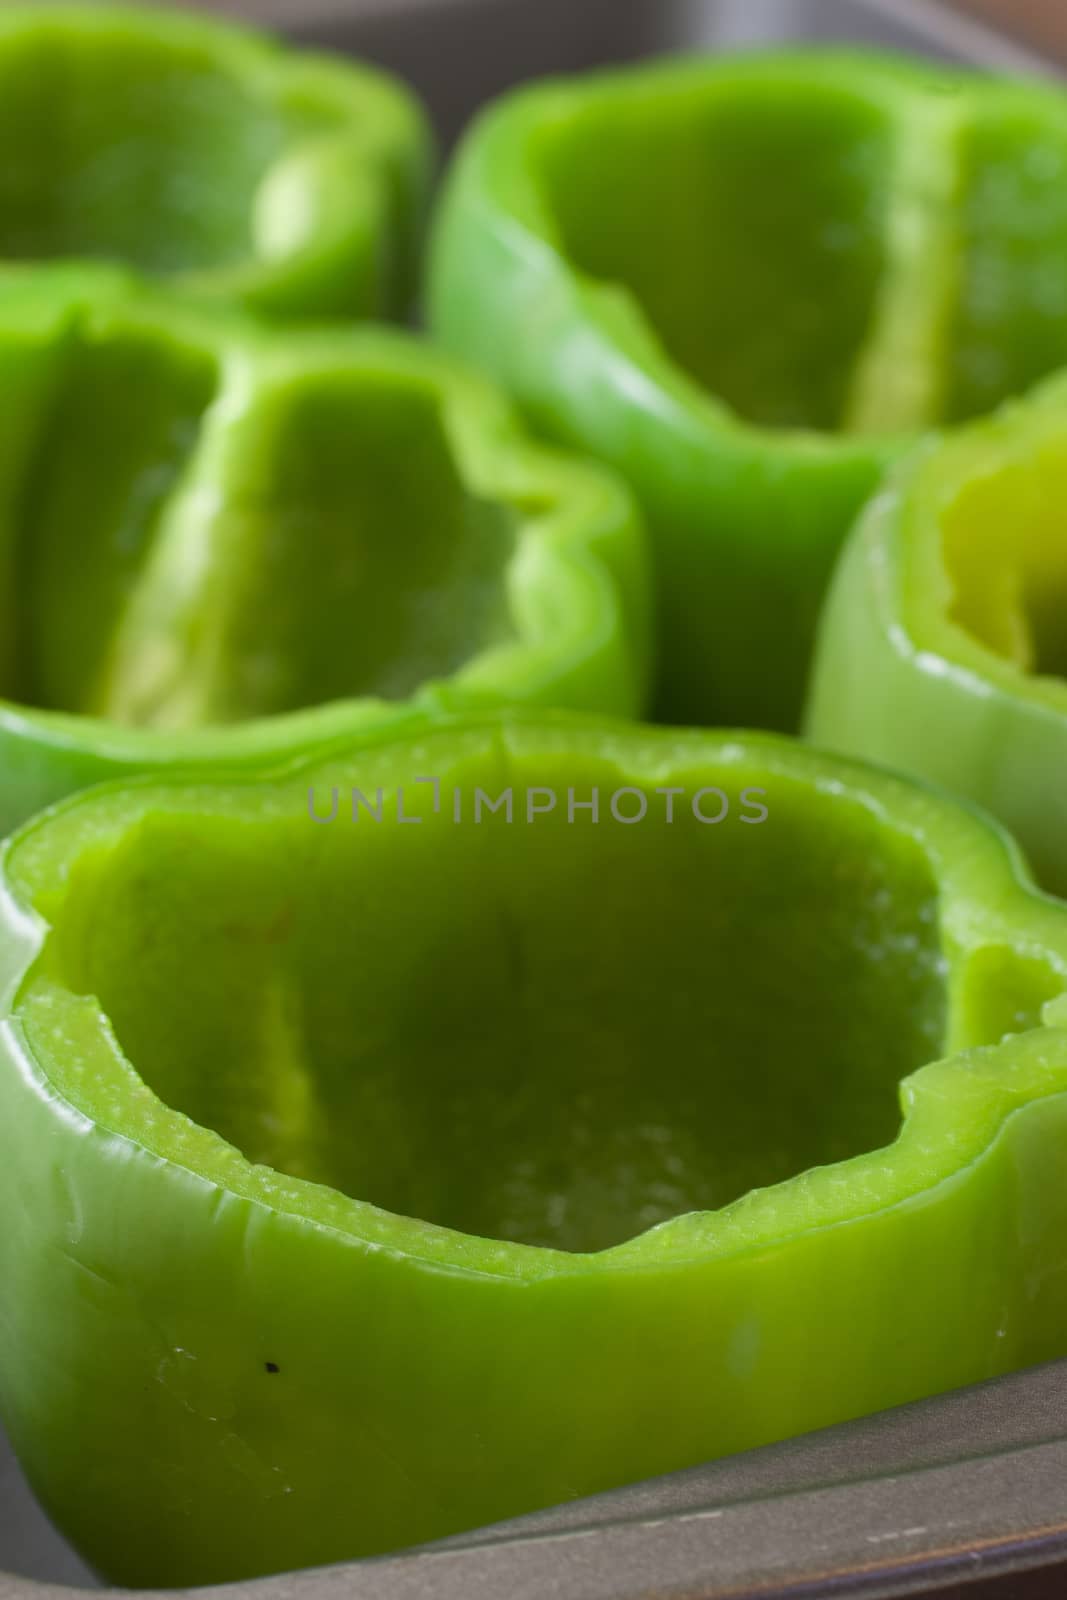 Green bell peppers cut and cleaned for stuffed peppers.